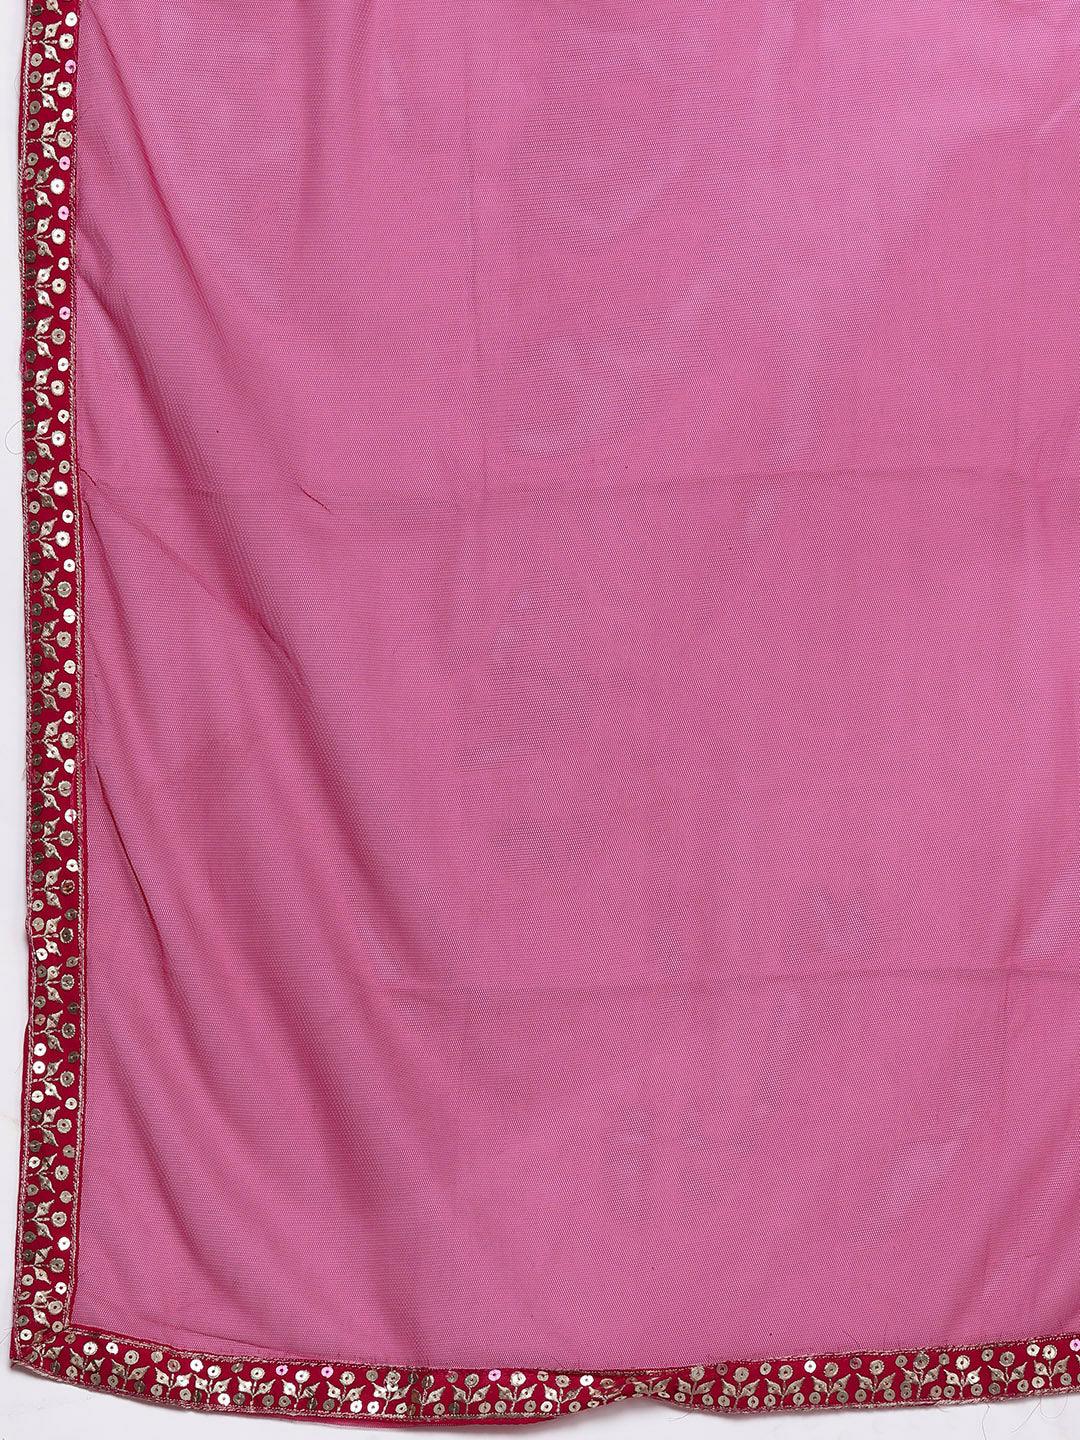 Pink Embroidered Georgette Anarkali Kurta With Trousers & Dupatta - Libas